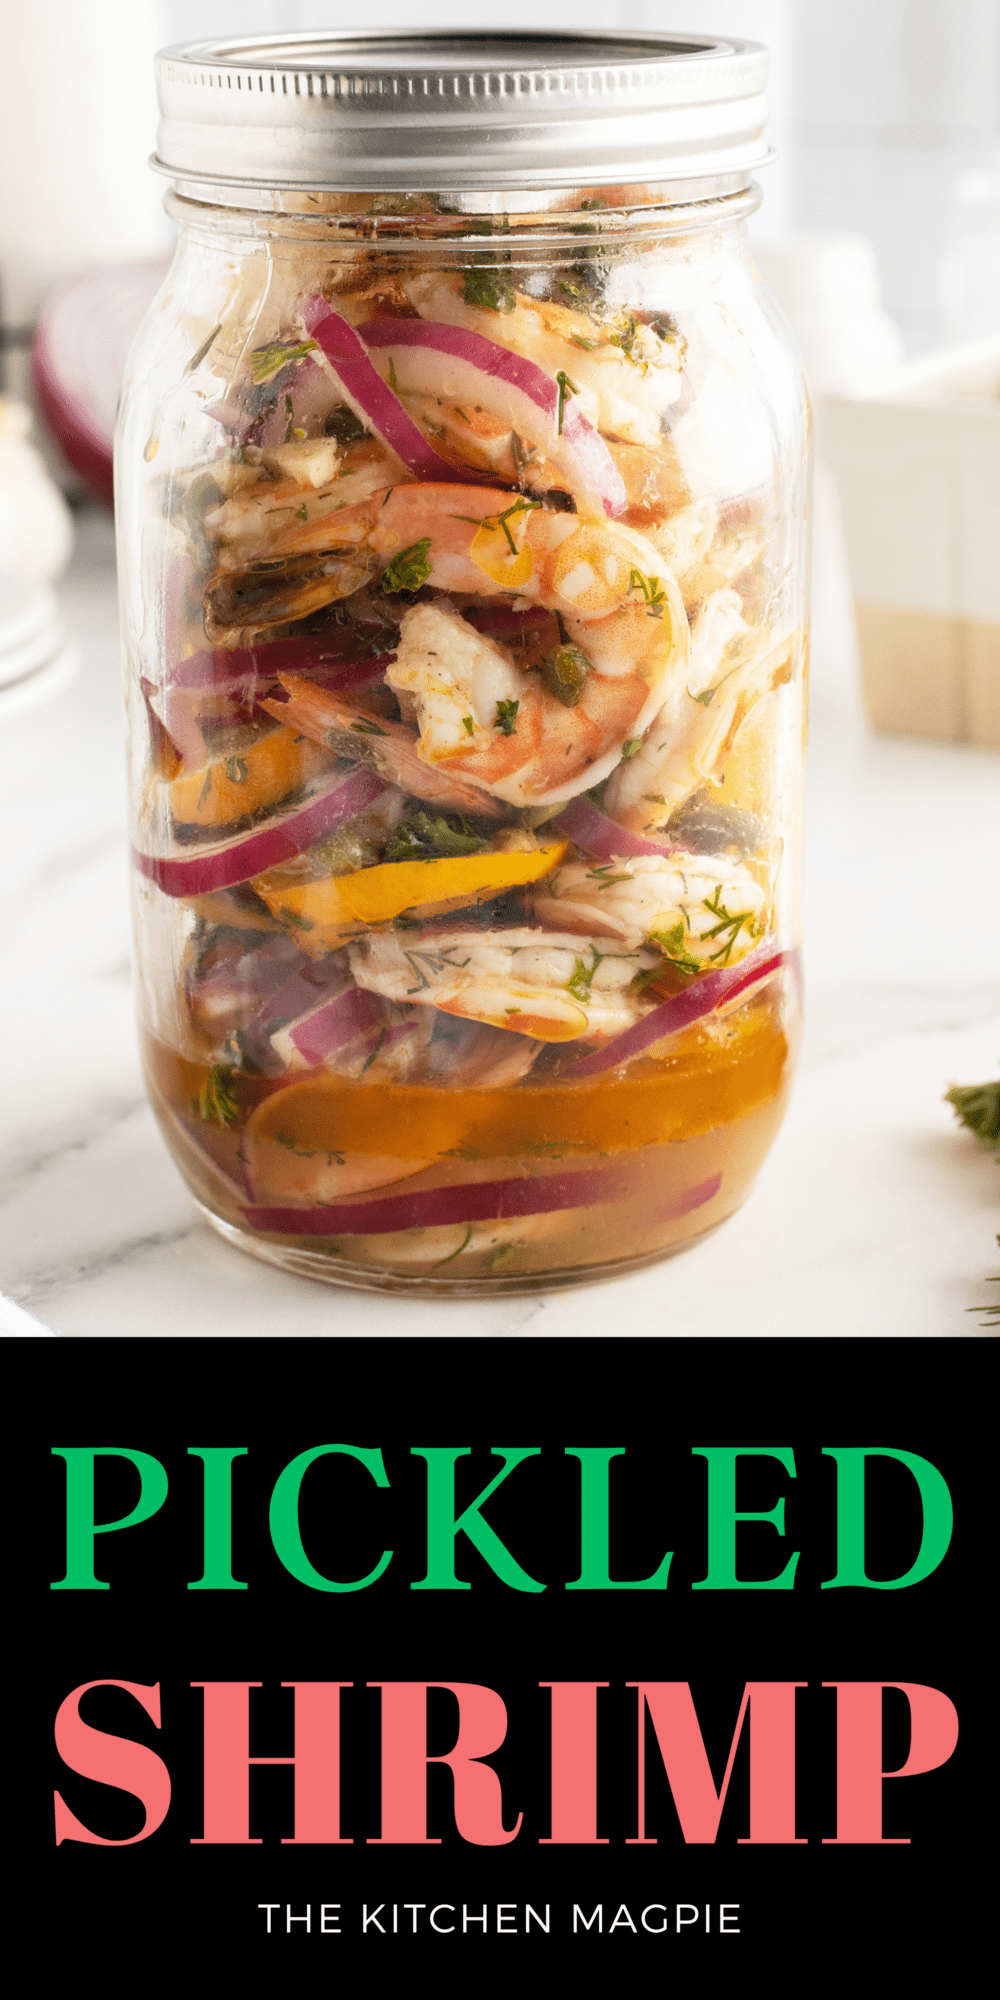 Tangy, fresh, and healthy pickled shrimp are the perfect appetizer with a glass of white wine or a healthy snack.